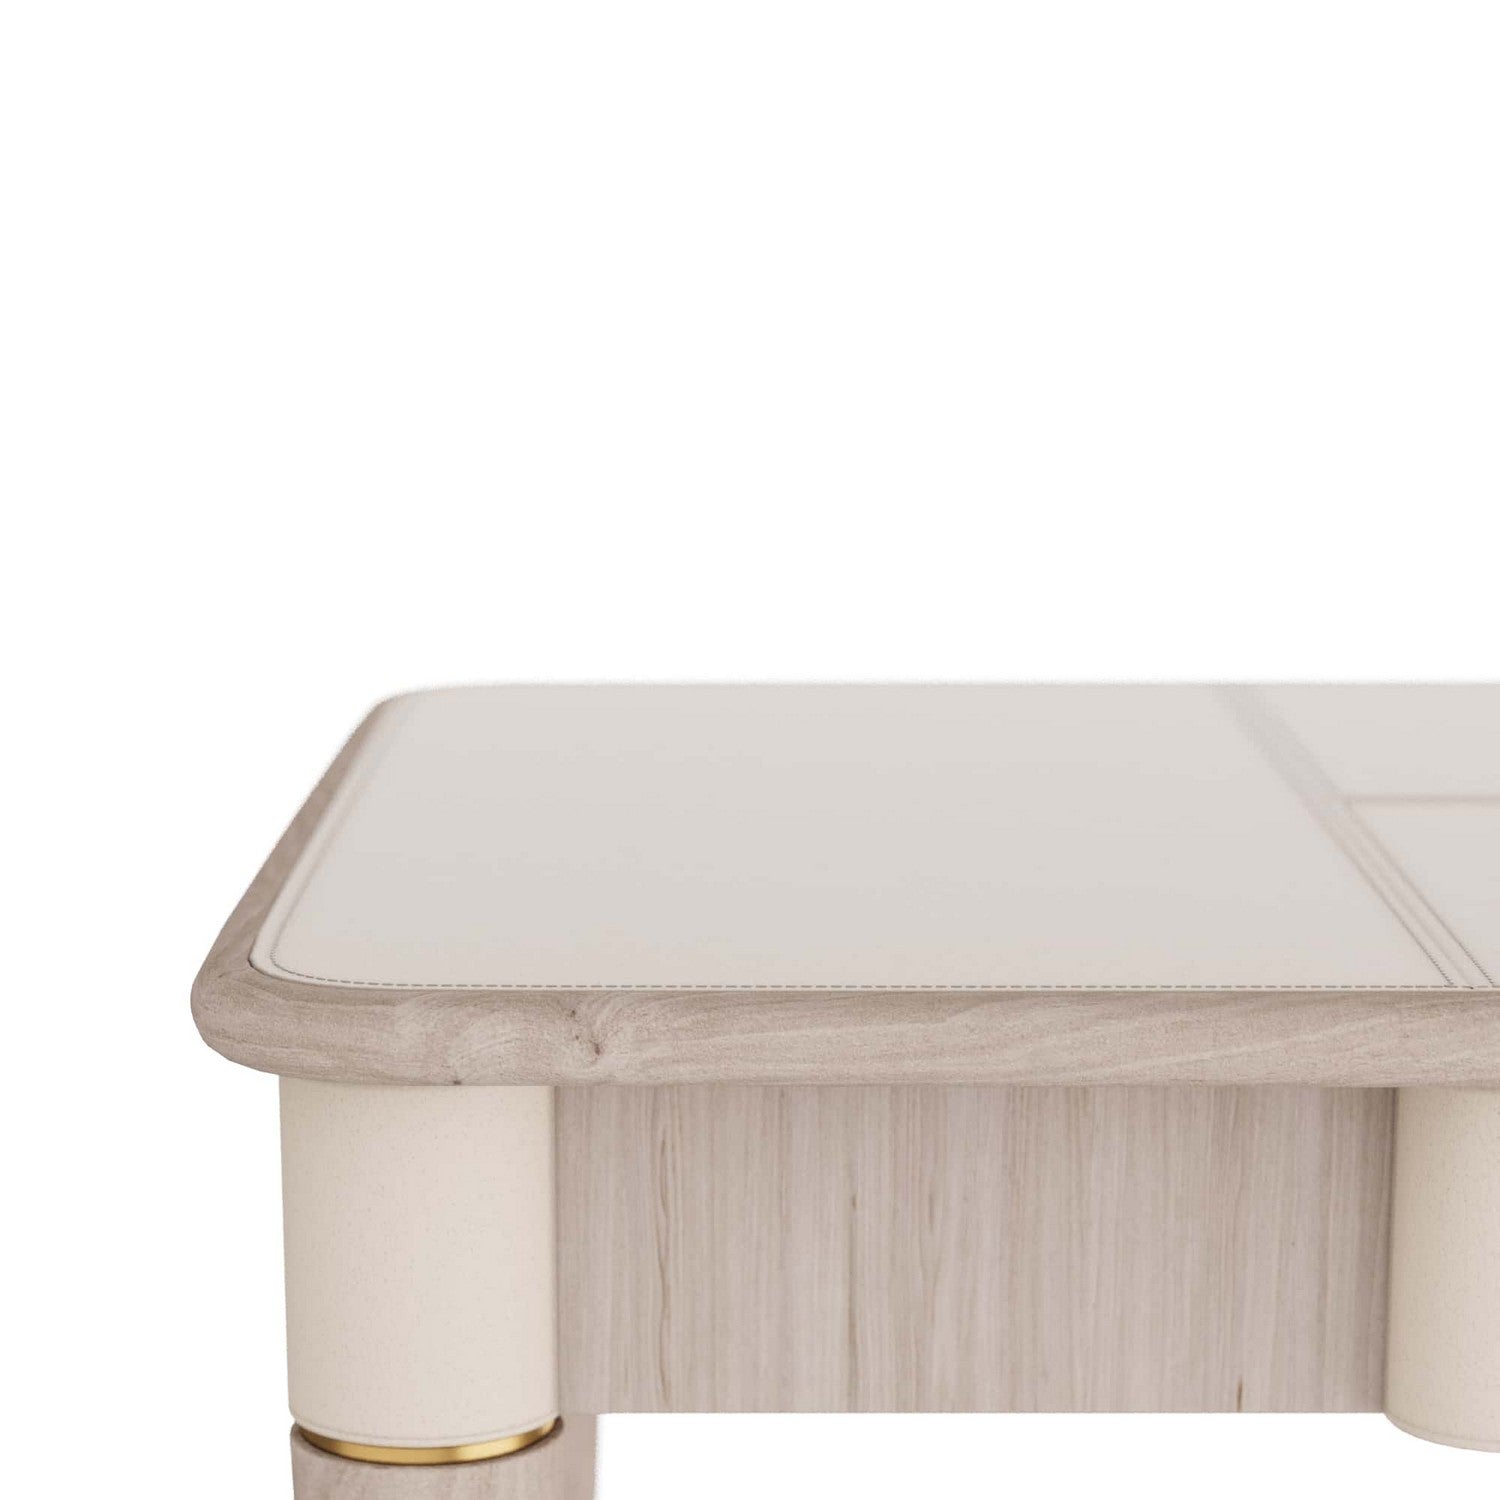 Desk from the Willis collection in Ivory finish